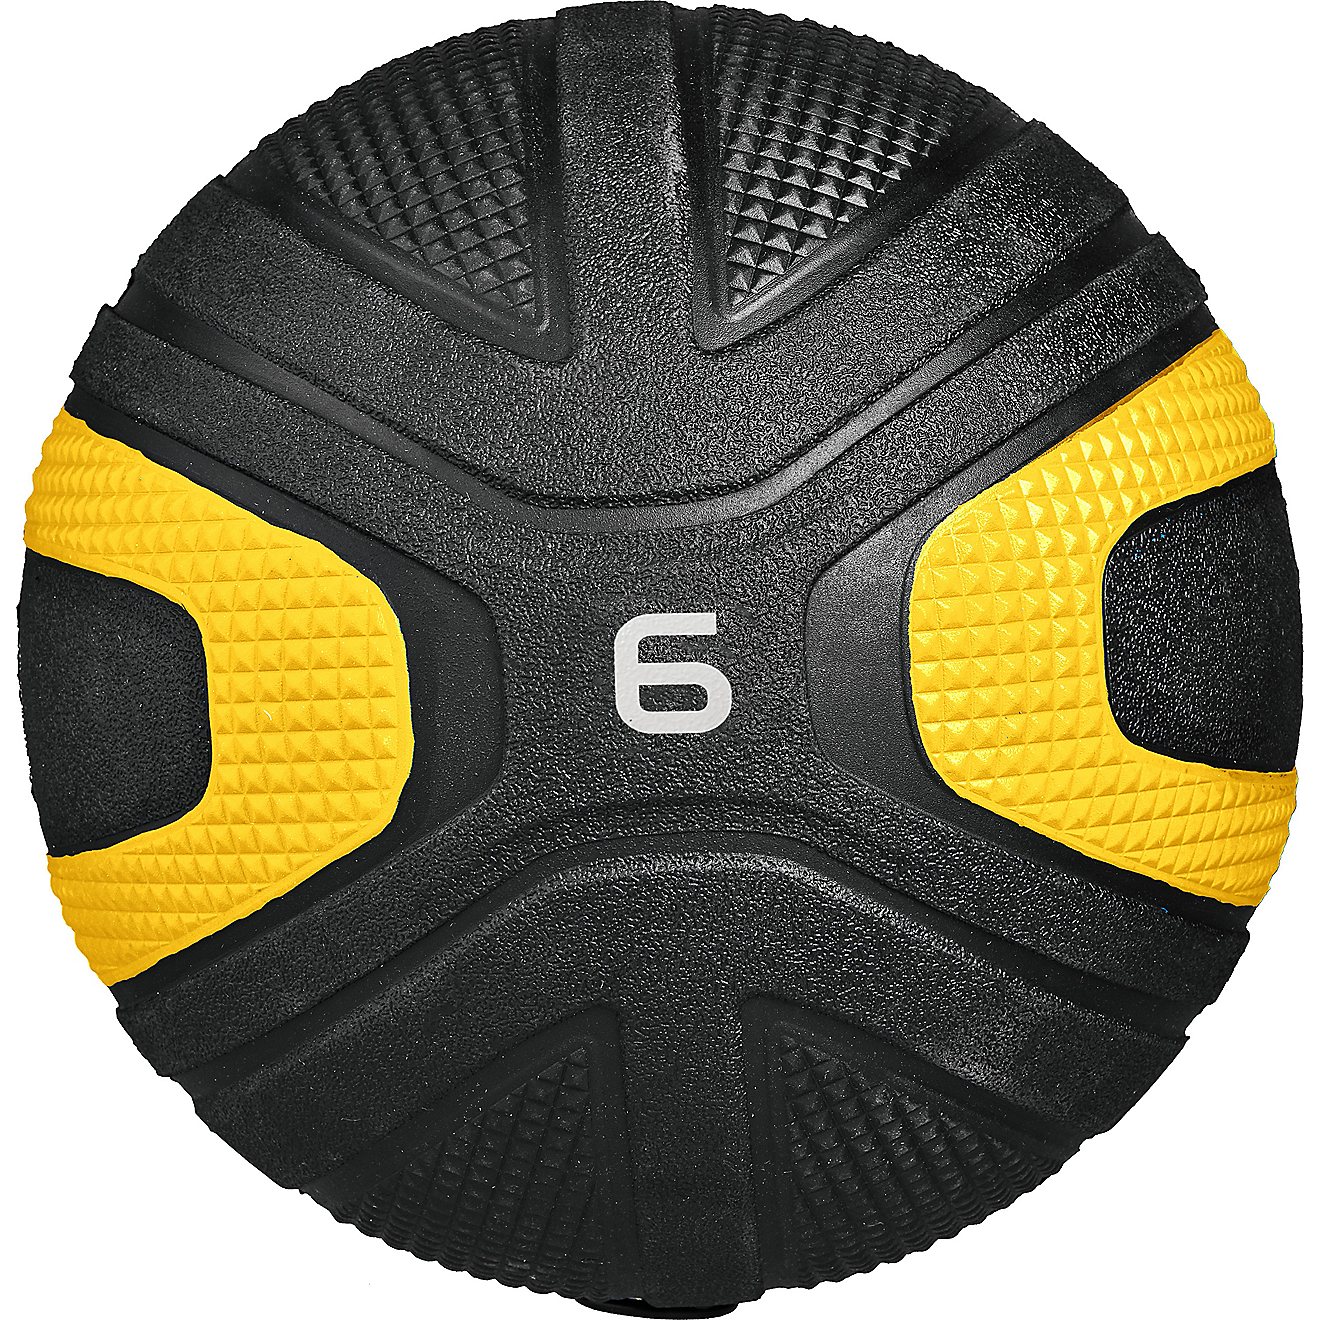 BCG 2.0 6 lb Medicine Ball                                                                                                       - view number 1